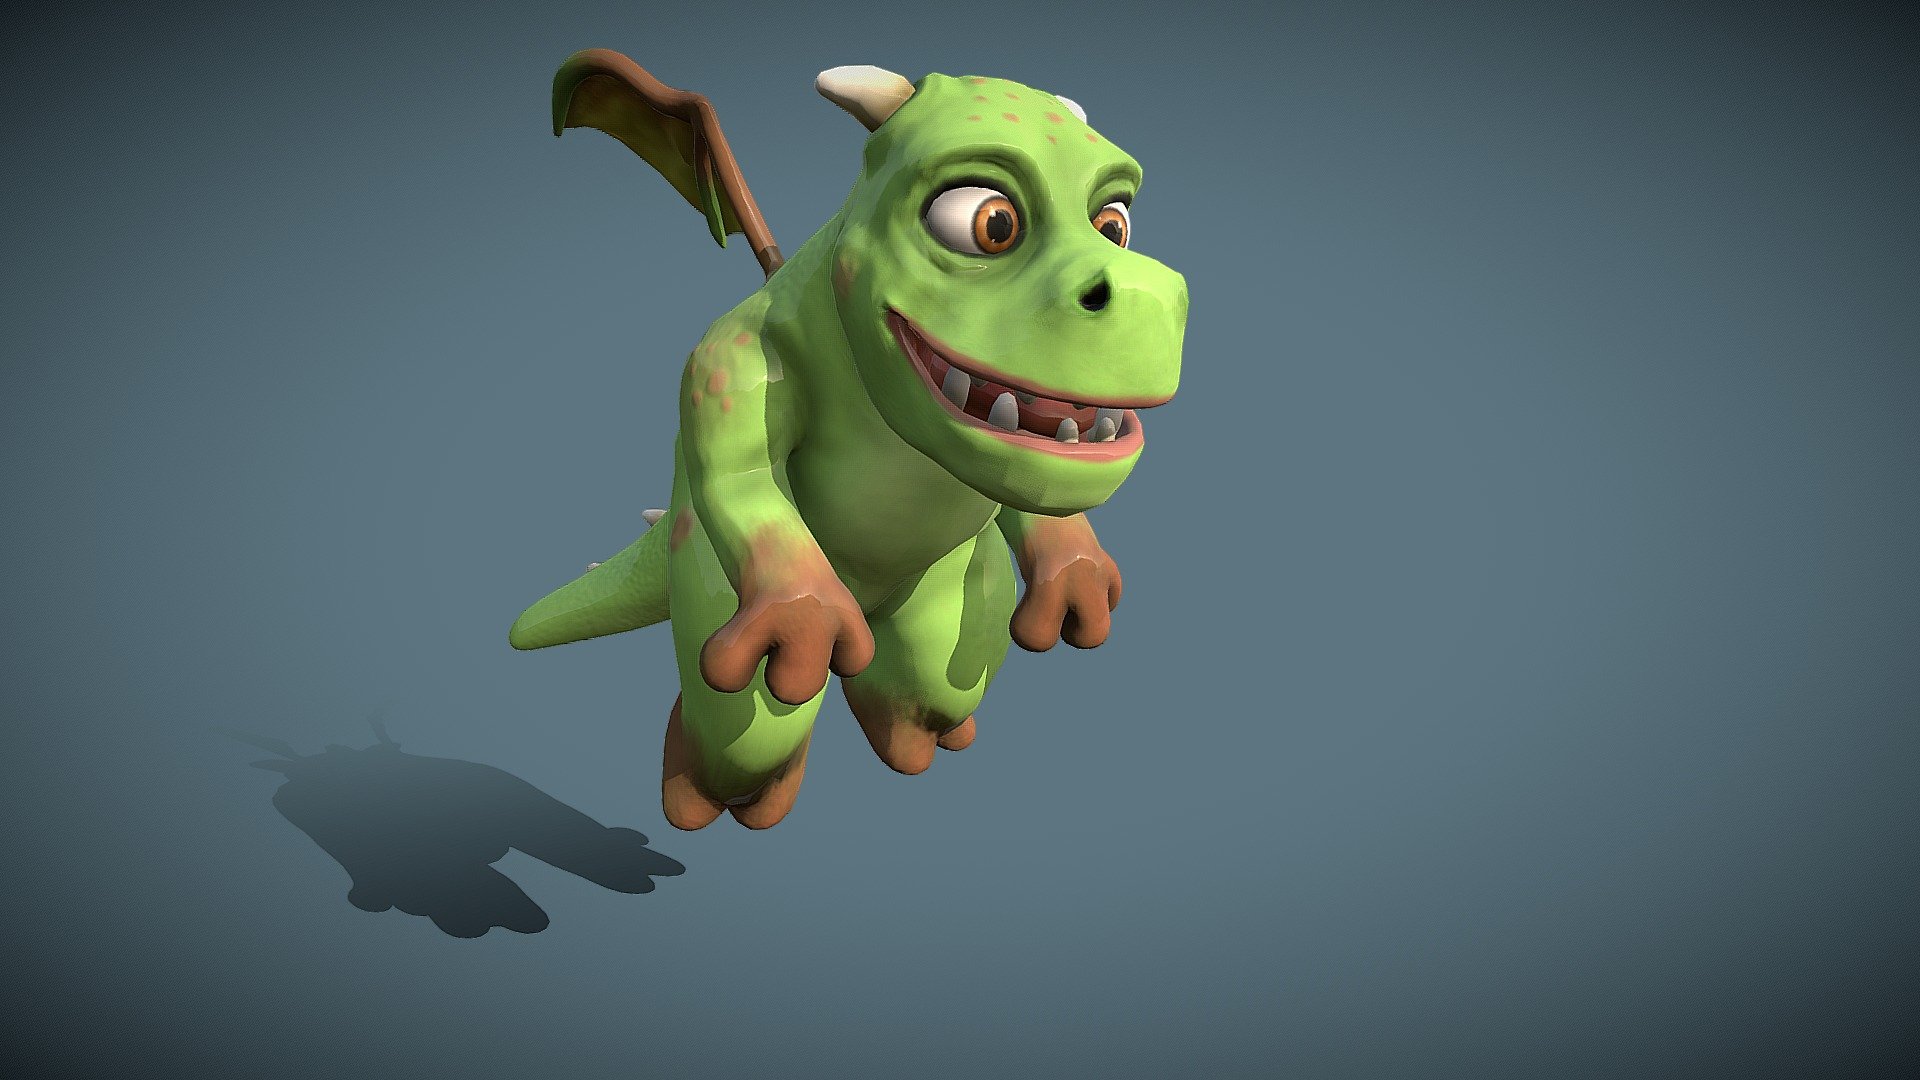 Cartoon young dragon

Features

-Model is completly unwrapped
-Layered scene (RIgg, mesh, lights, BG, controls)
-Lowpoly model
-Optimal Vray settings 
-Morpher expresions
-No need any plugin to open scene
-All nodes are named clearly
-Clean topology based on quads.
-One mesh
-Hand painted model

File format

-3Ds Max 2015 (Vray 3.0.0)
-3Ds Max 2012 (Vray 3.0.0)
-Obj 2015
-3Ds 2015
-FBX (contains body skeleton and morpher expressions) 3Ds Max

Textures

-Body texture res is 4k
-PNG format

Rigging

-Rigging inside 3Ds Max by Skin modifier, used CAT skeleton
-Handly rigged with vertex weight and painting for better movements
-Scene also include fly animation

Lights and Render setting are included in the 3DS Max scene (V-ray). Just open and render
Scene also include Walk animation, folder FBX format whitch can be used on another 3D software or games engines.

I hope u like it!
For more models just click on my name and browse library 3d model